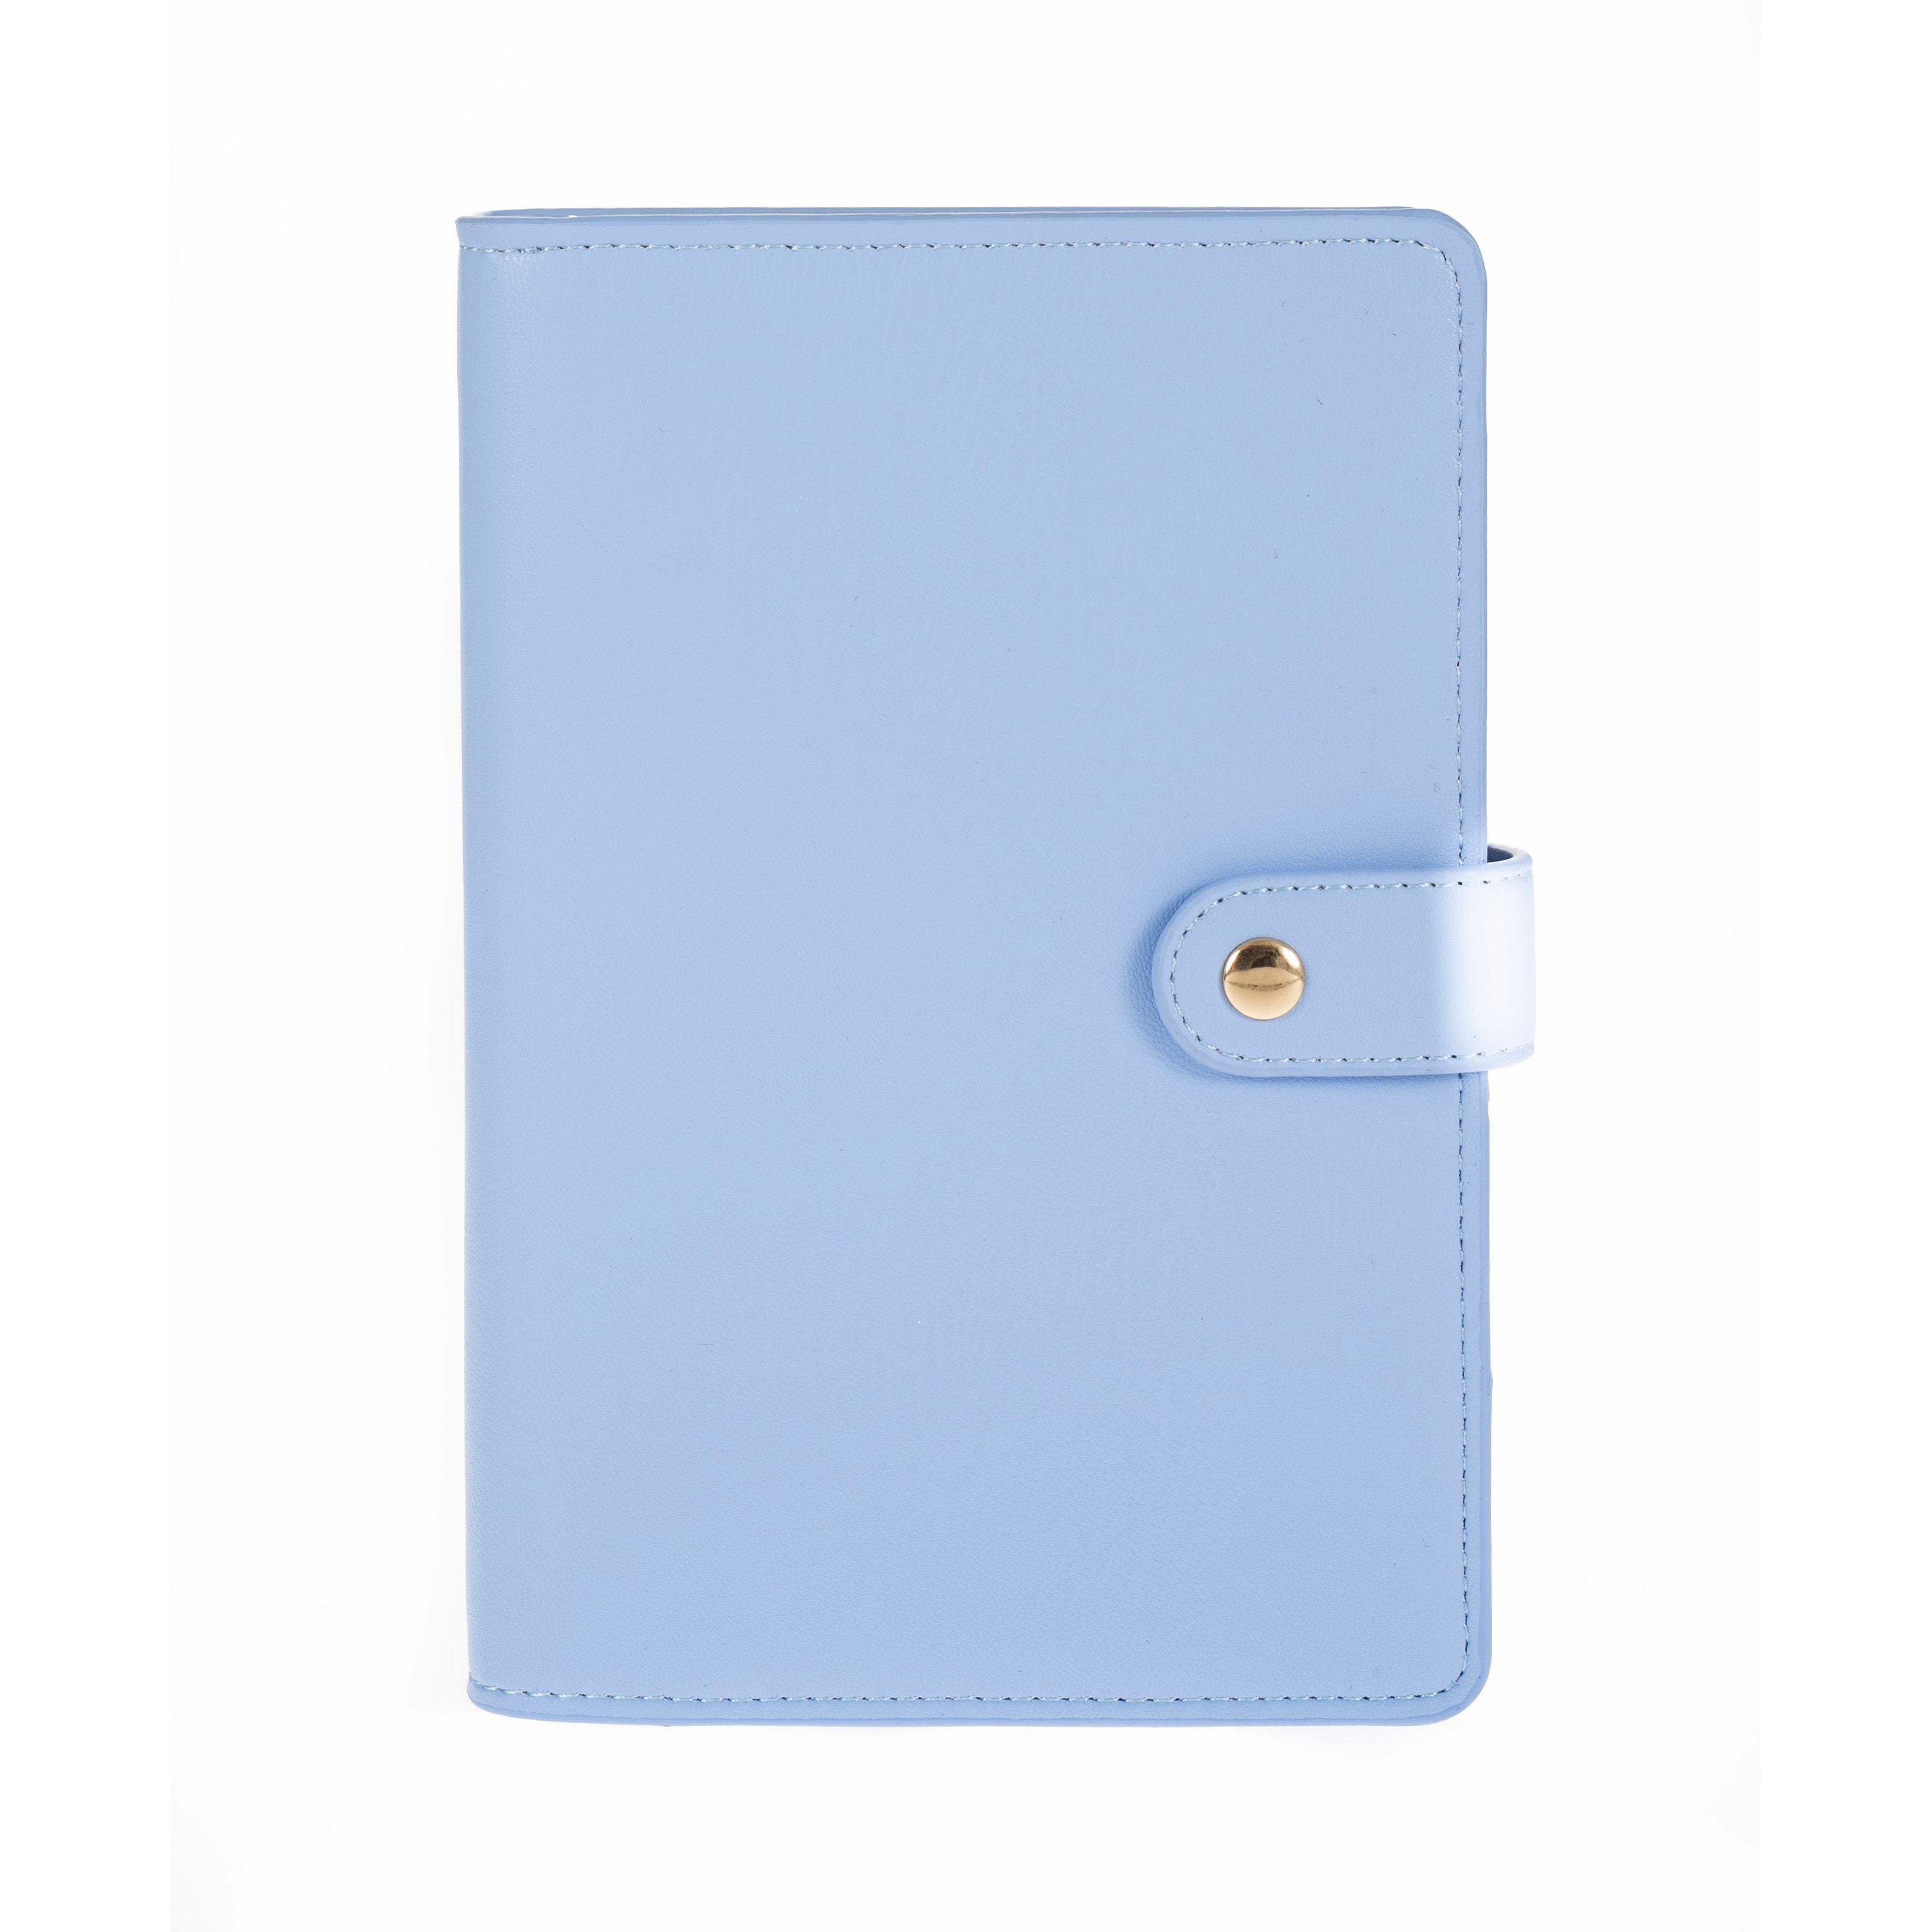 DayPlanner - Hard Cover Fashion - Personal Size Blue